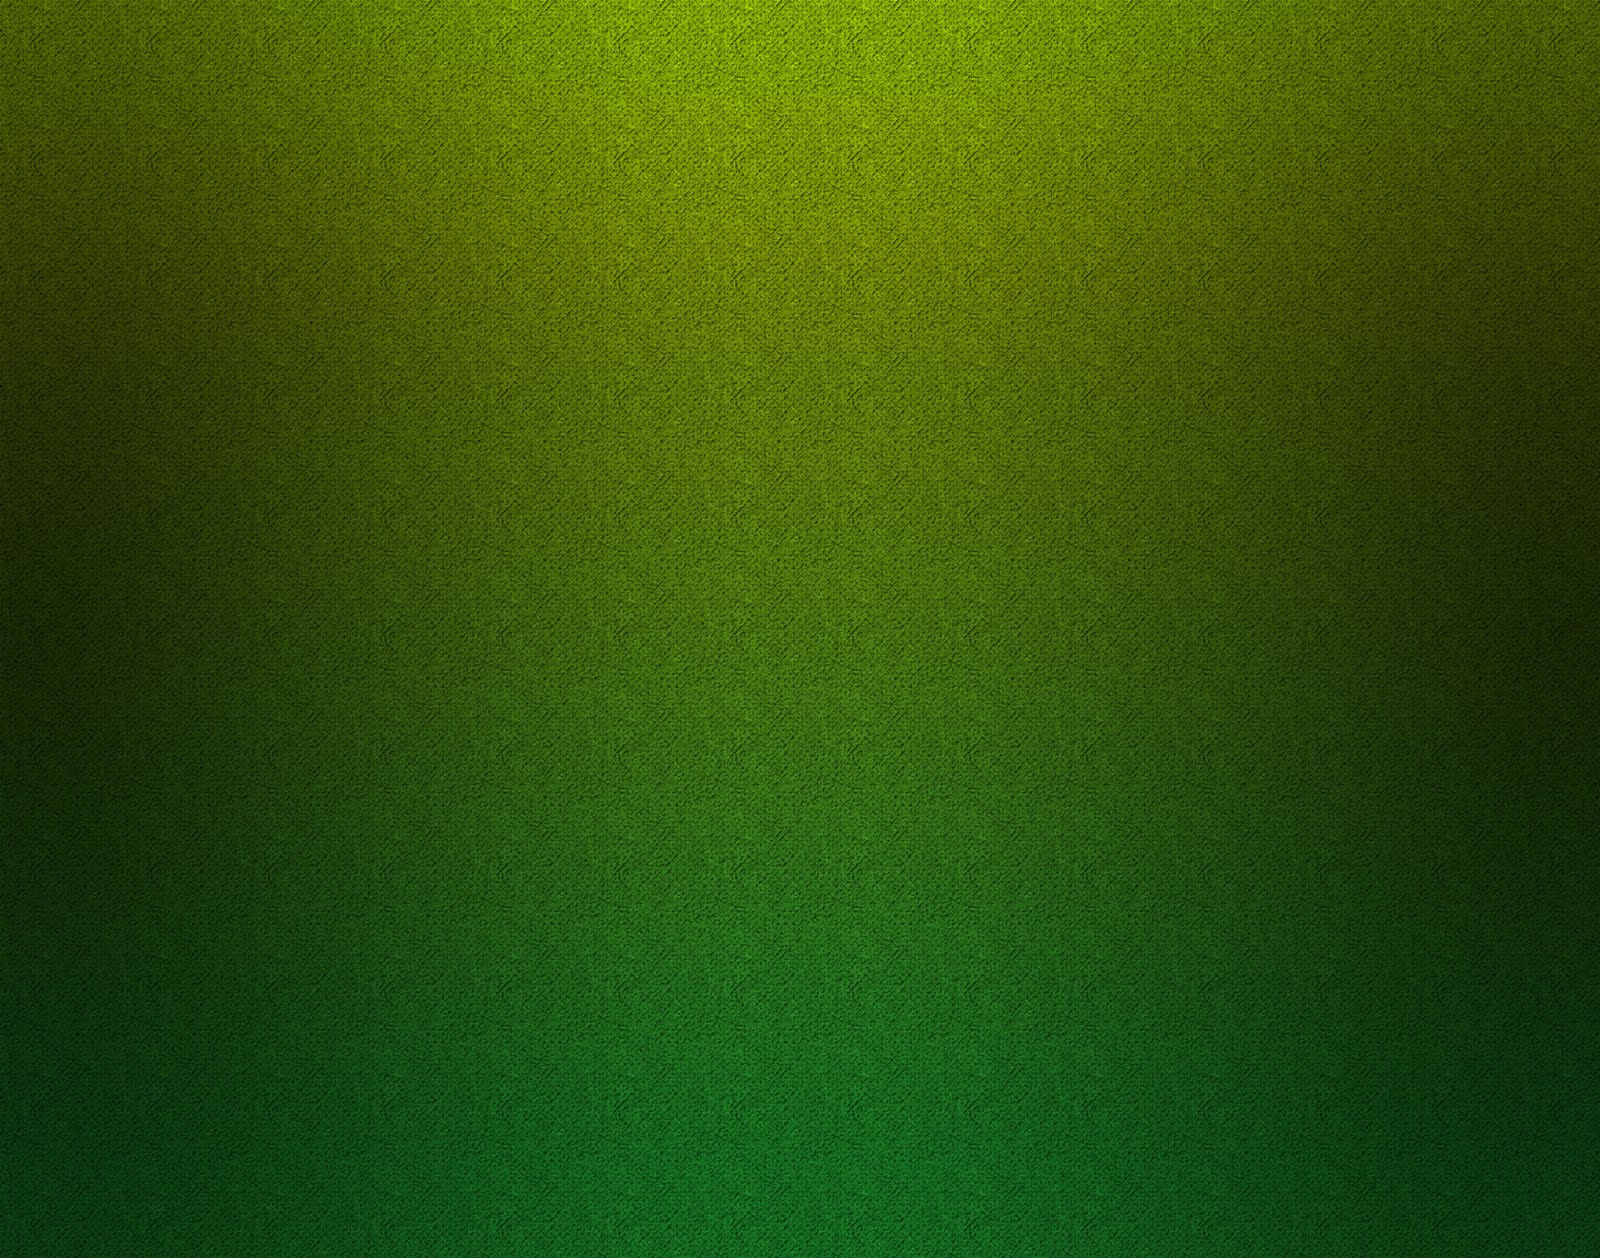 Green Textures Powerpoint Background Ppt